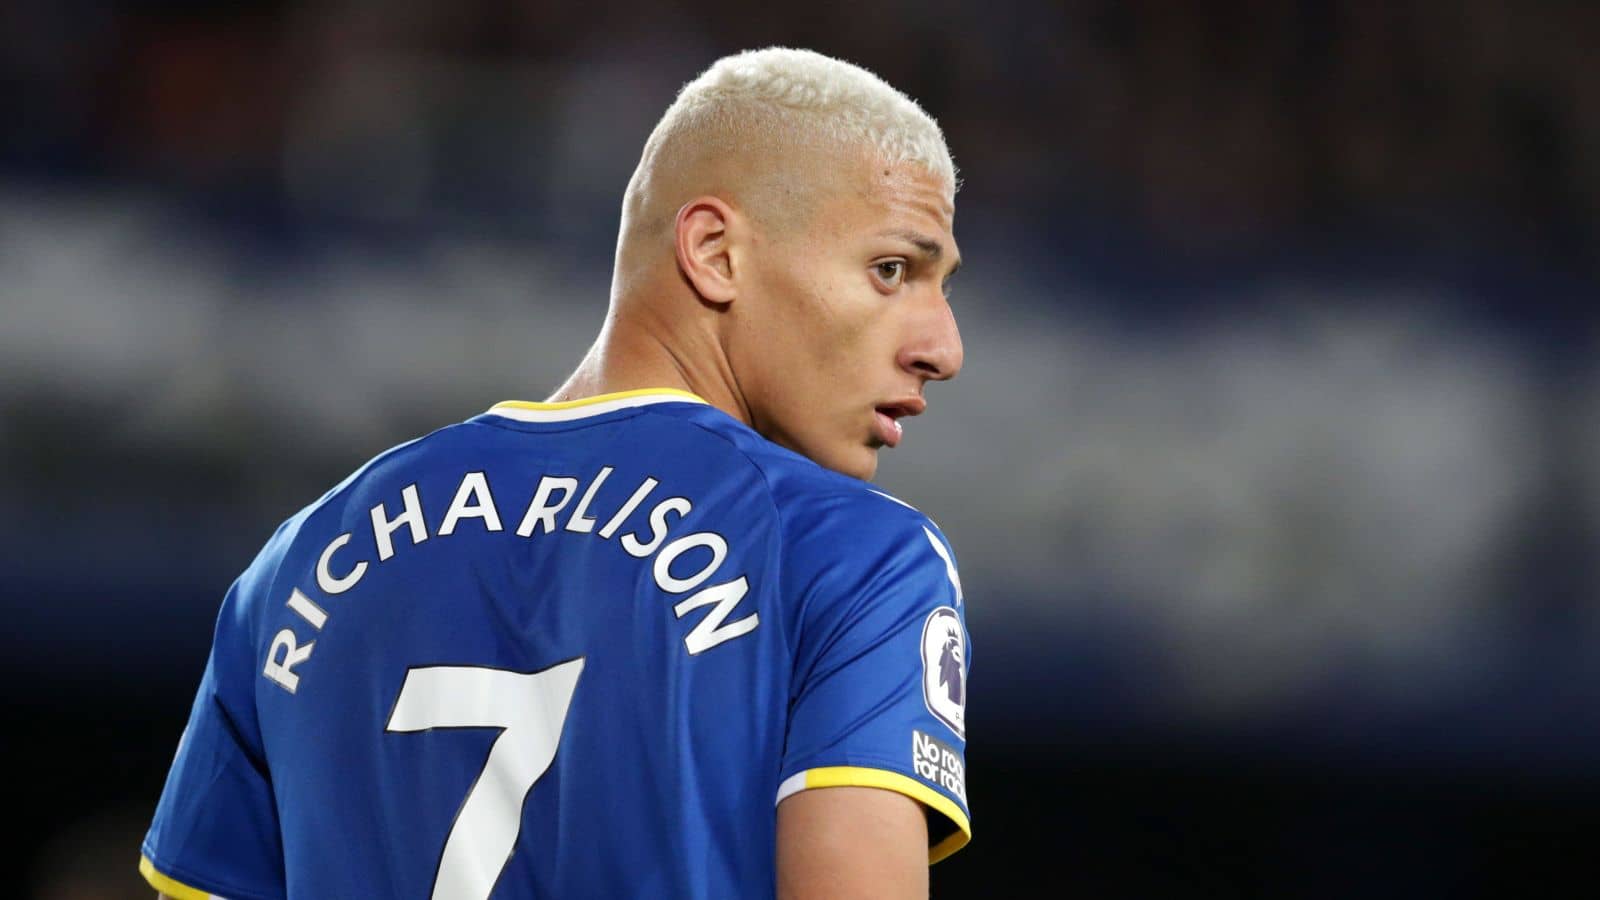 Richarlison transfer latest: Everton tell Tottenham only terms they will listen to for striker sale